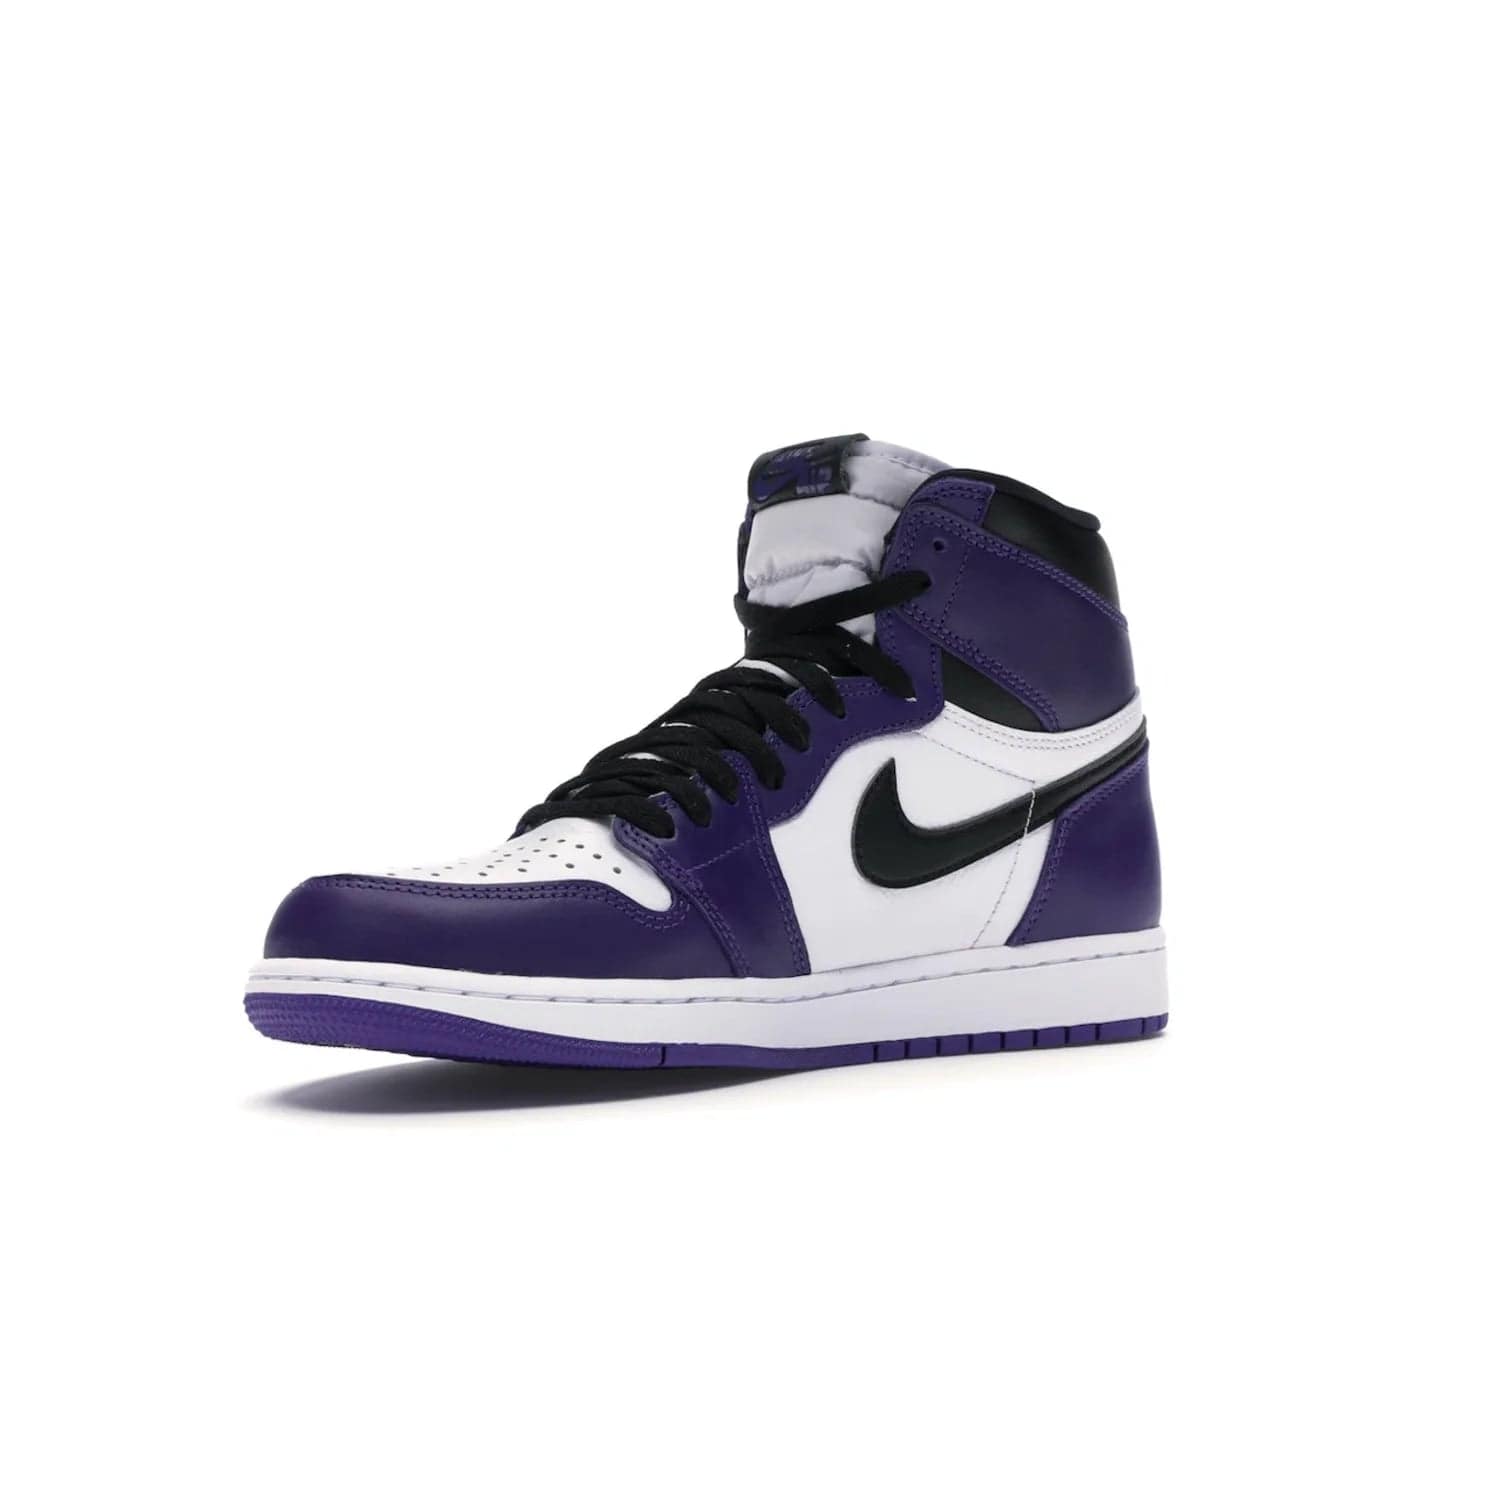 Jordan 1 Retro High Court Purple White - Image 15 - Only at www.BallersClubKickz.com - Grab the classic Jordan 1 Retro High Court Purple White and add major flavor to your collection. White leather upper with Court Purple overlays and Swoosh logo. White midsole and purple outsole. Get yours and rep your Jordan Brand.